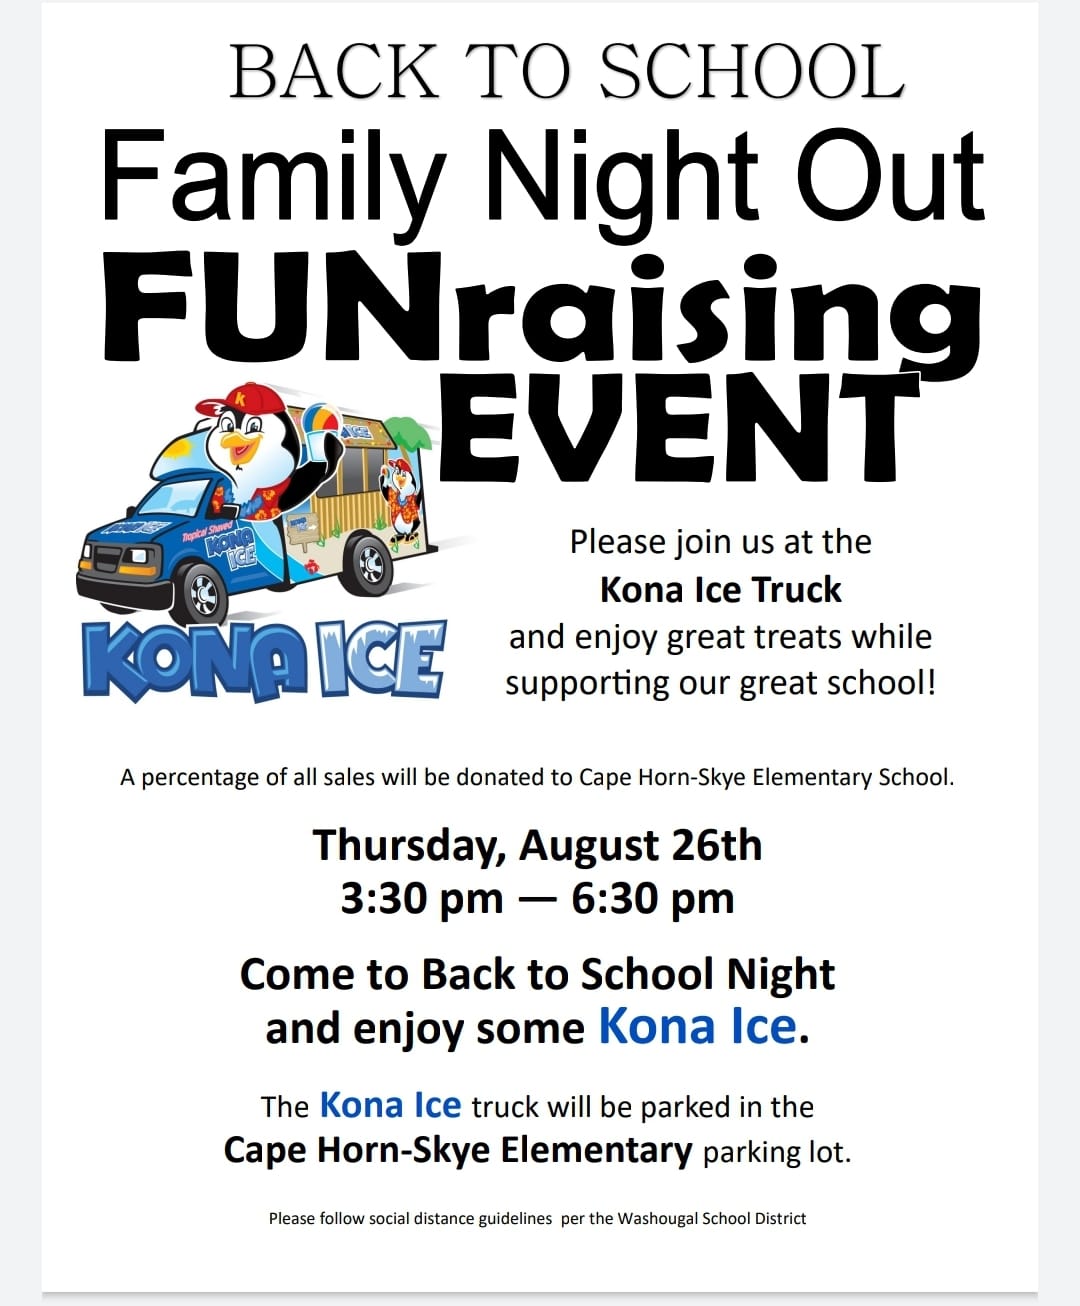 Aug 21 FUNraising Event. 3:30-6:30, Thursday, Aug 26 in the school parking lot.